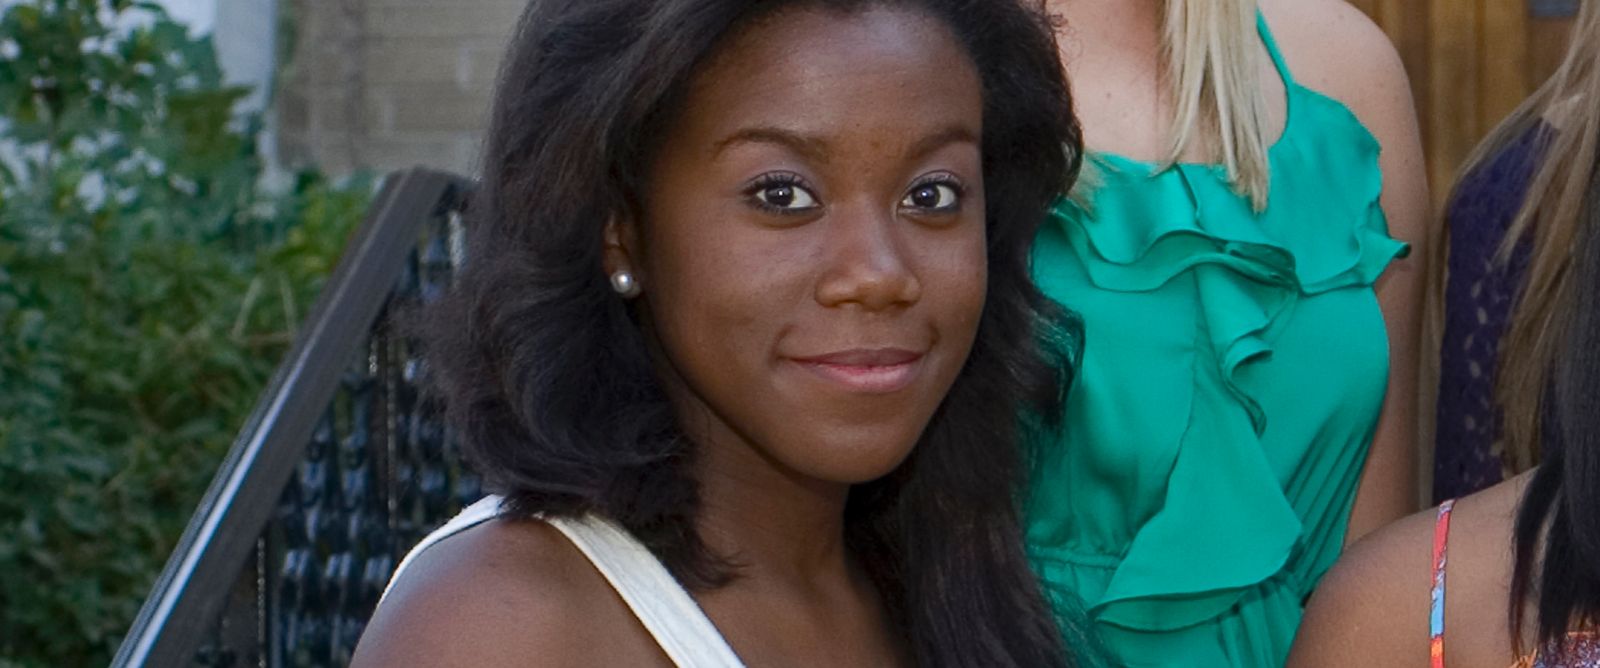 Jaelyn Young poses for a photo in 2012. (Melanie Thortis/The Vicksburg Evening Post via the AP)